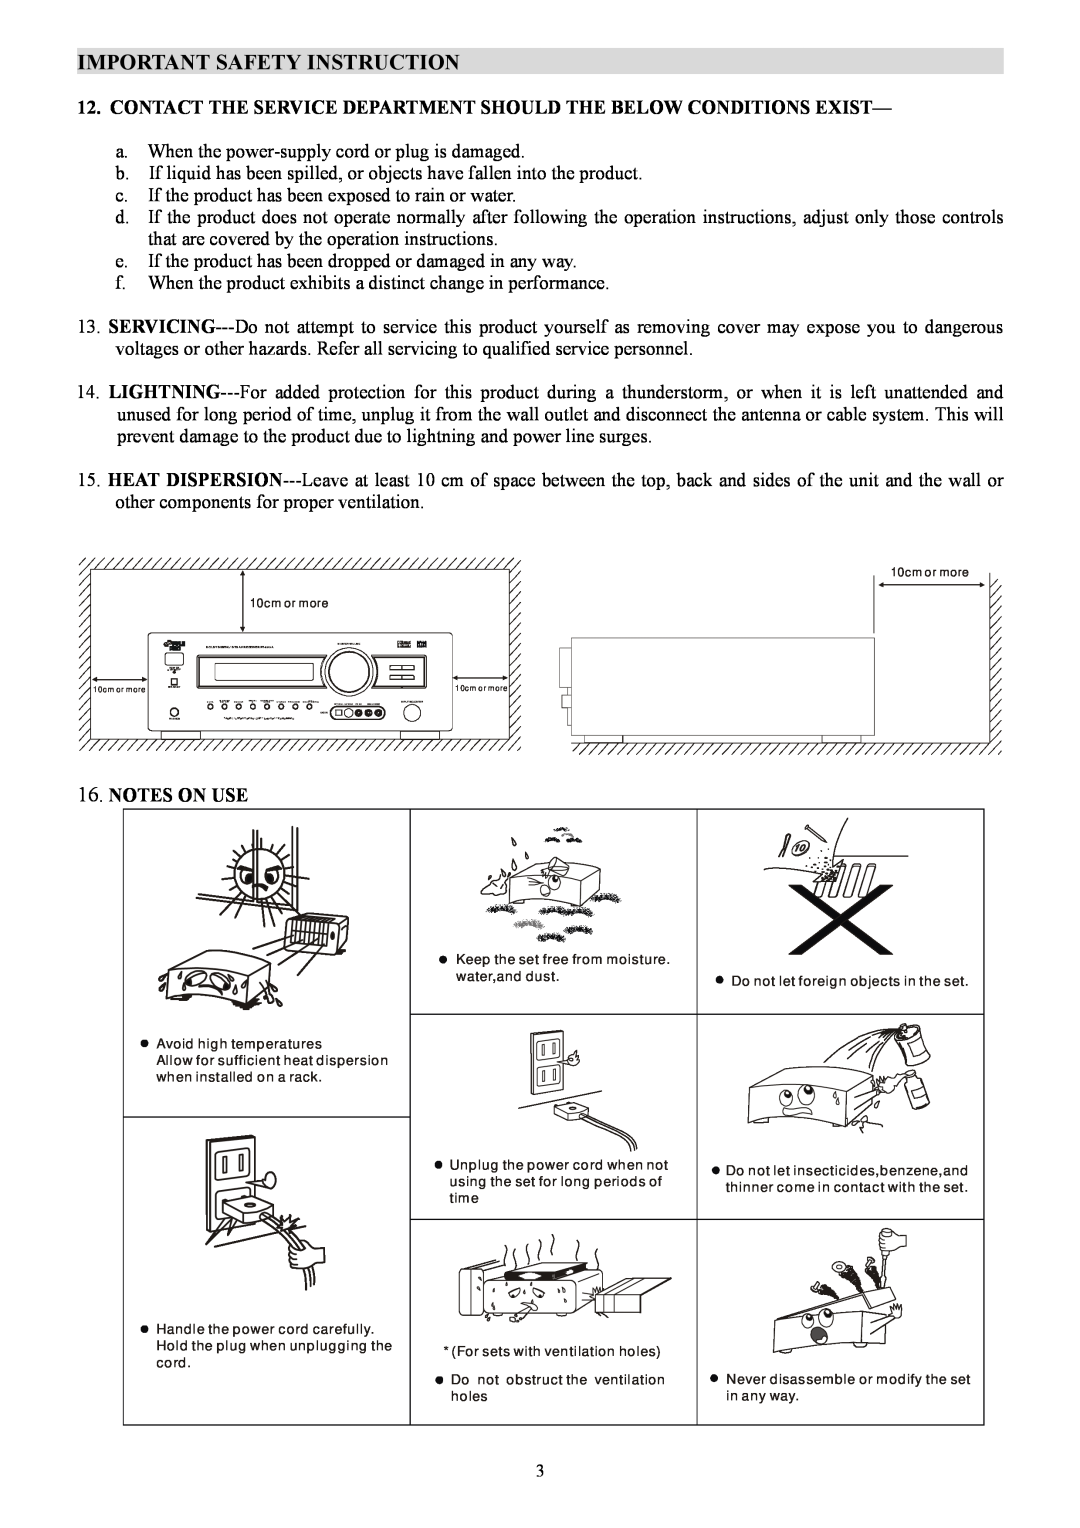 PYLE Audio PT-690A manual Notes On Use, Important Safety Instruction 